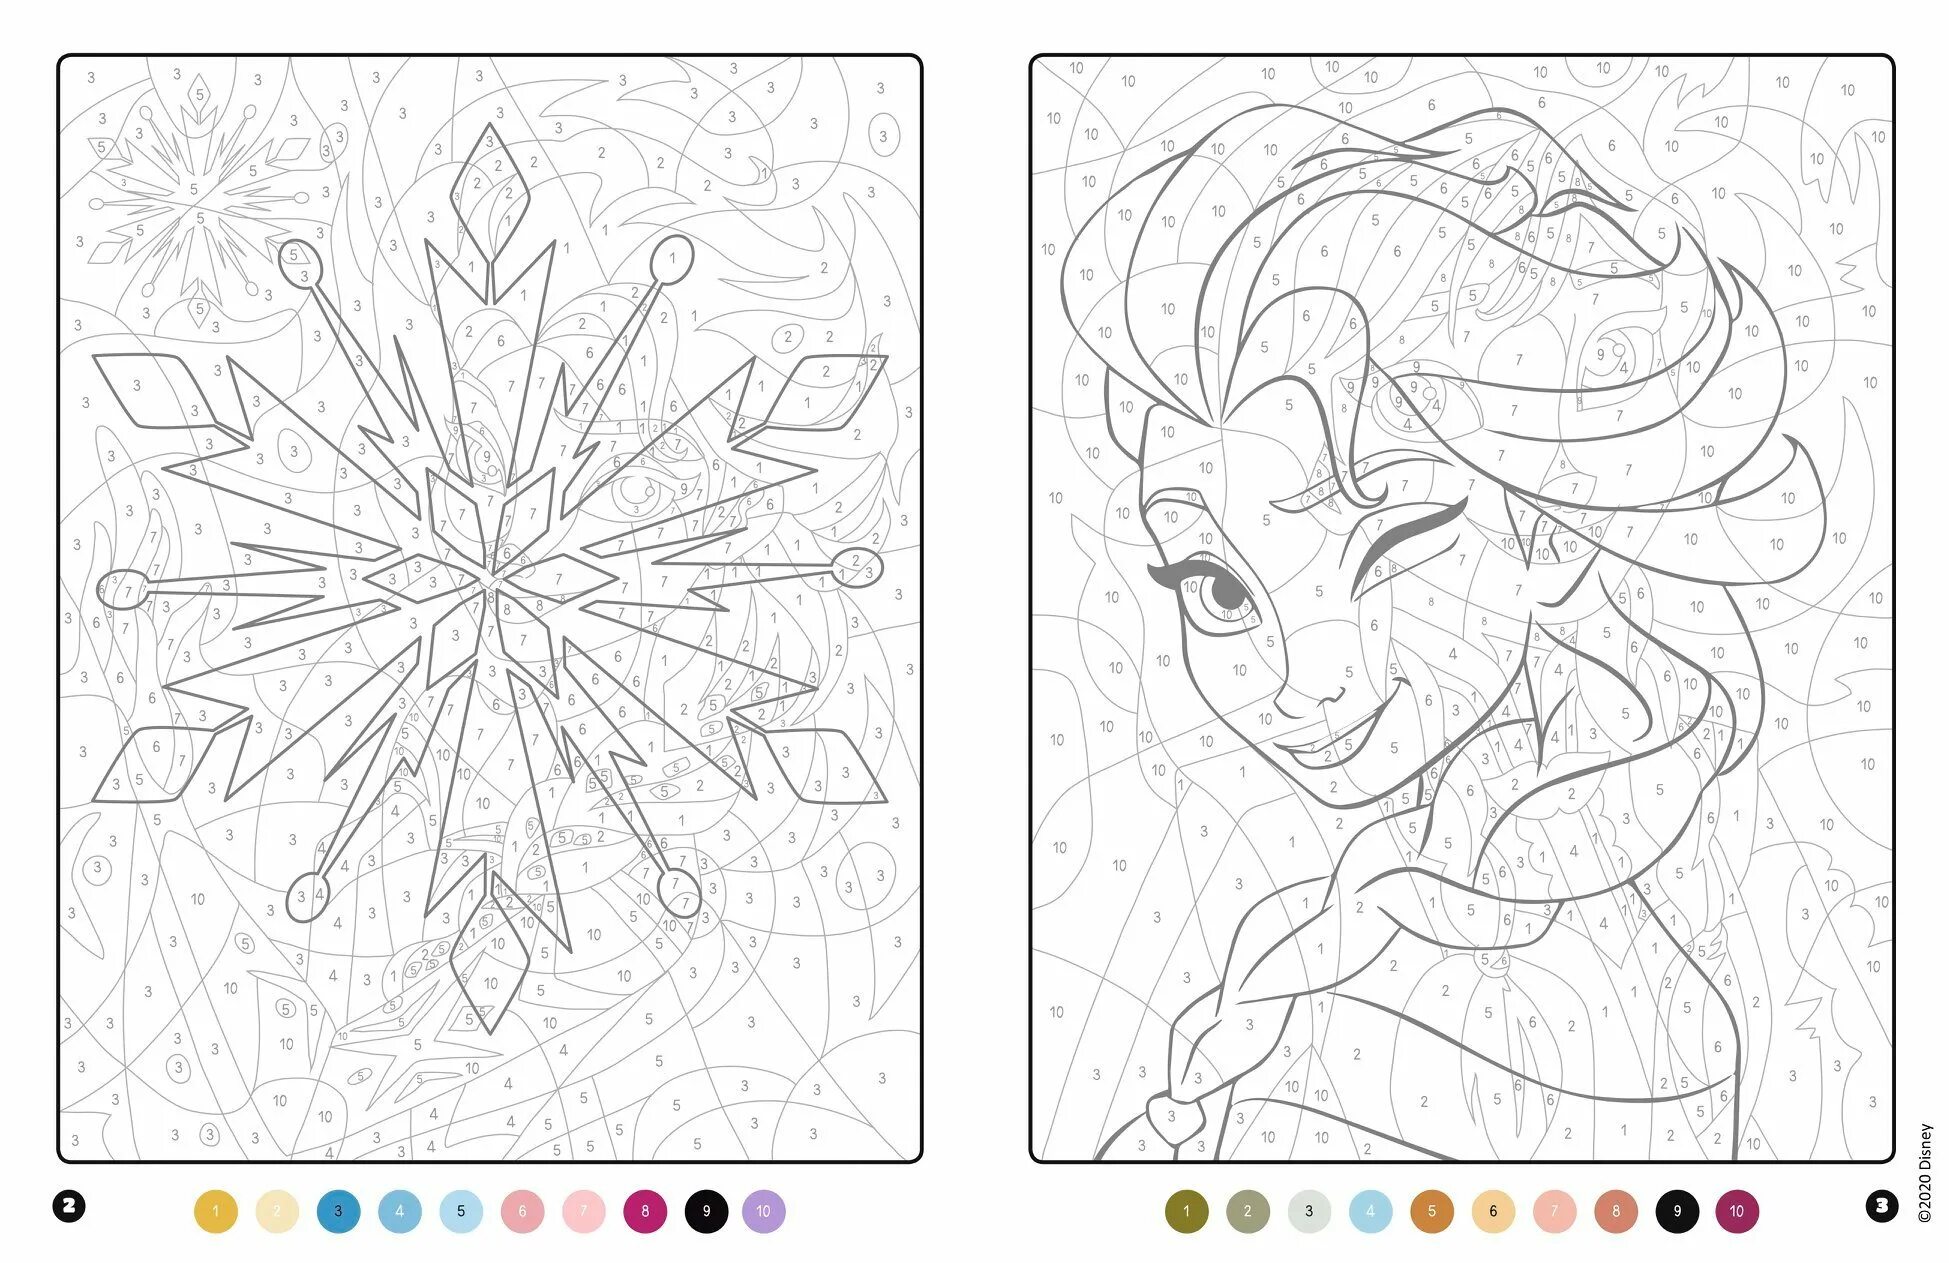 Colored ash coloring page